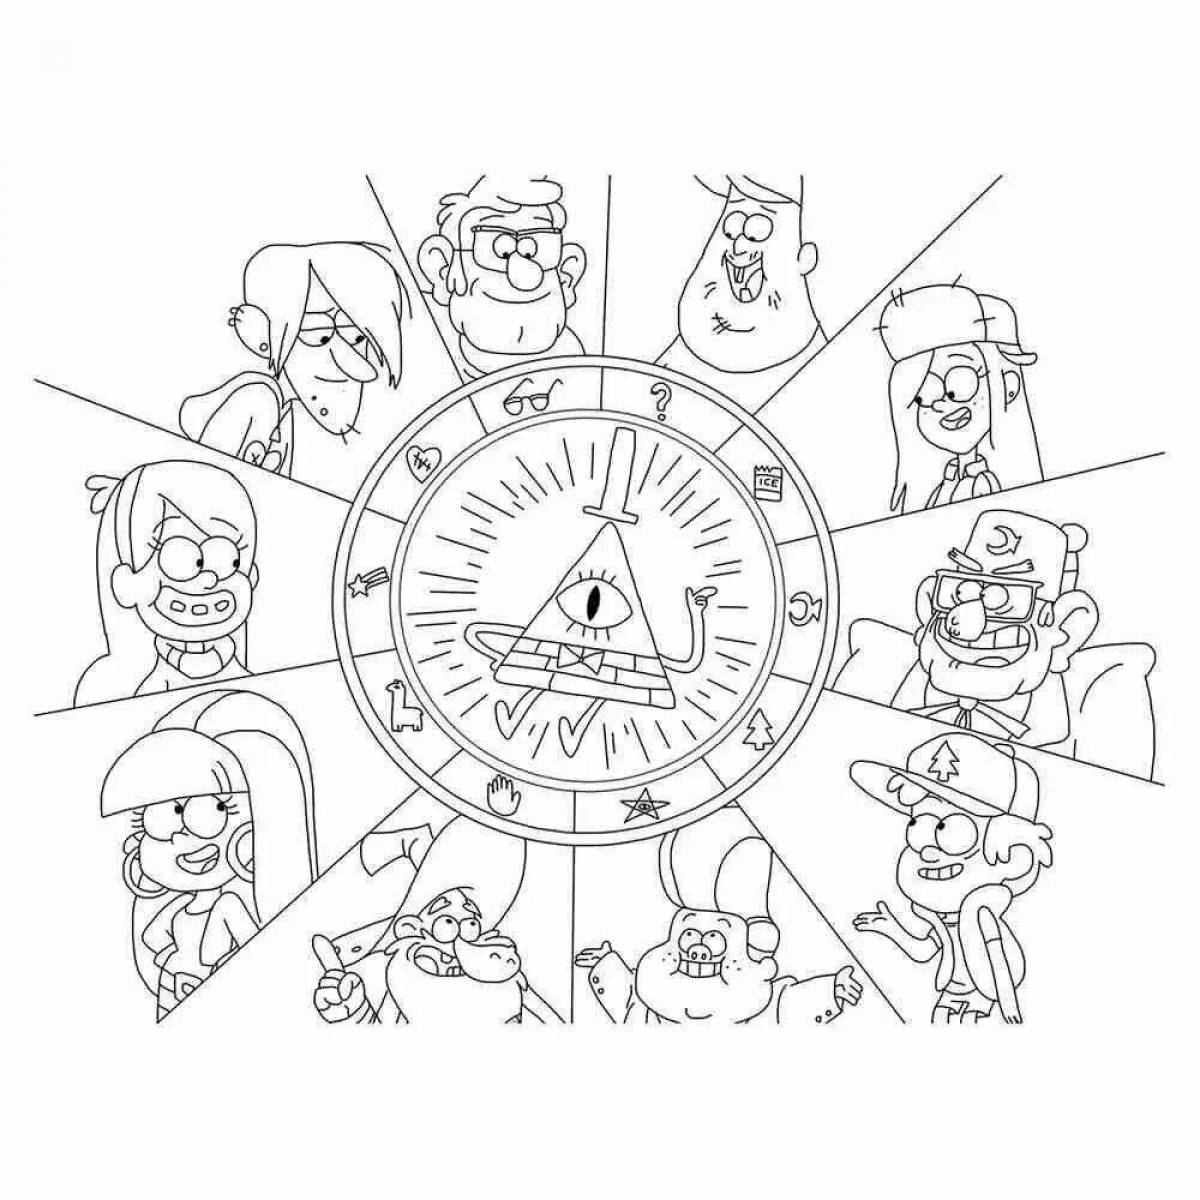 Gravity falls colorful coloring book for girls